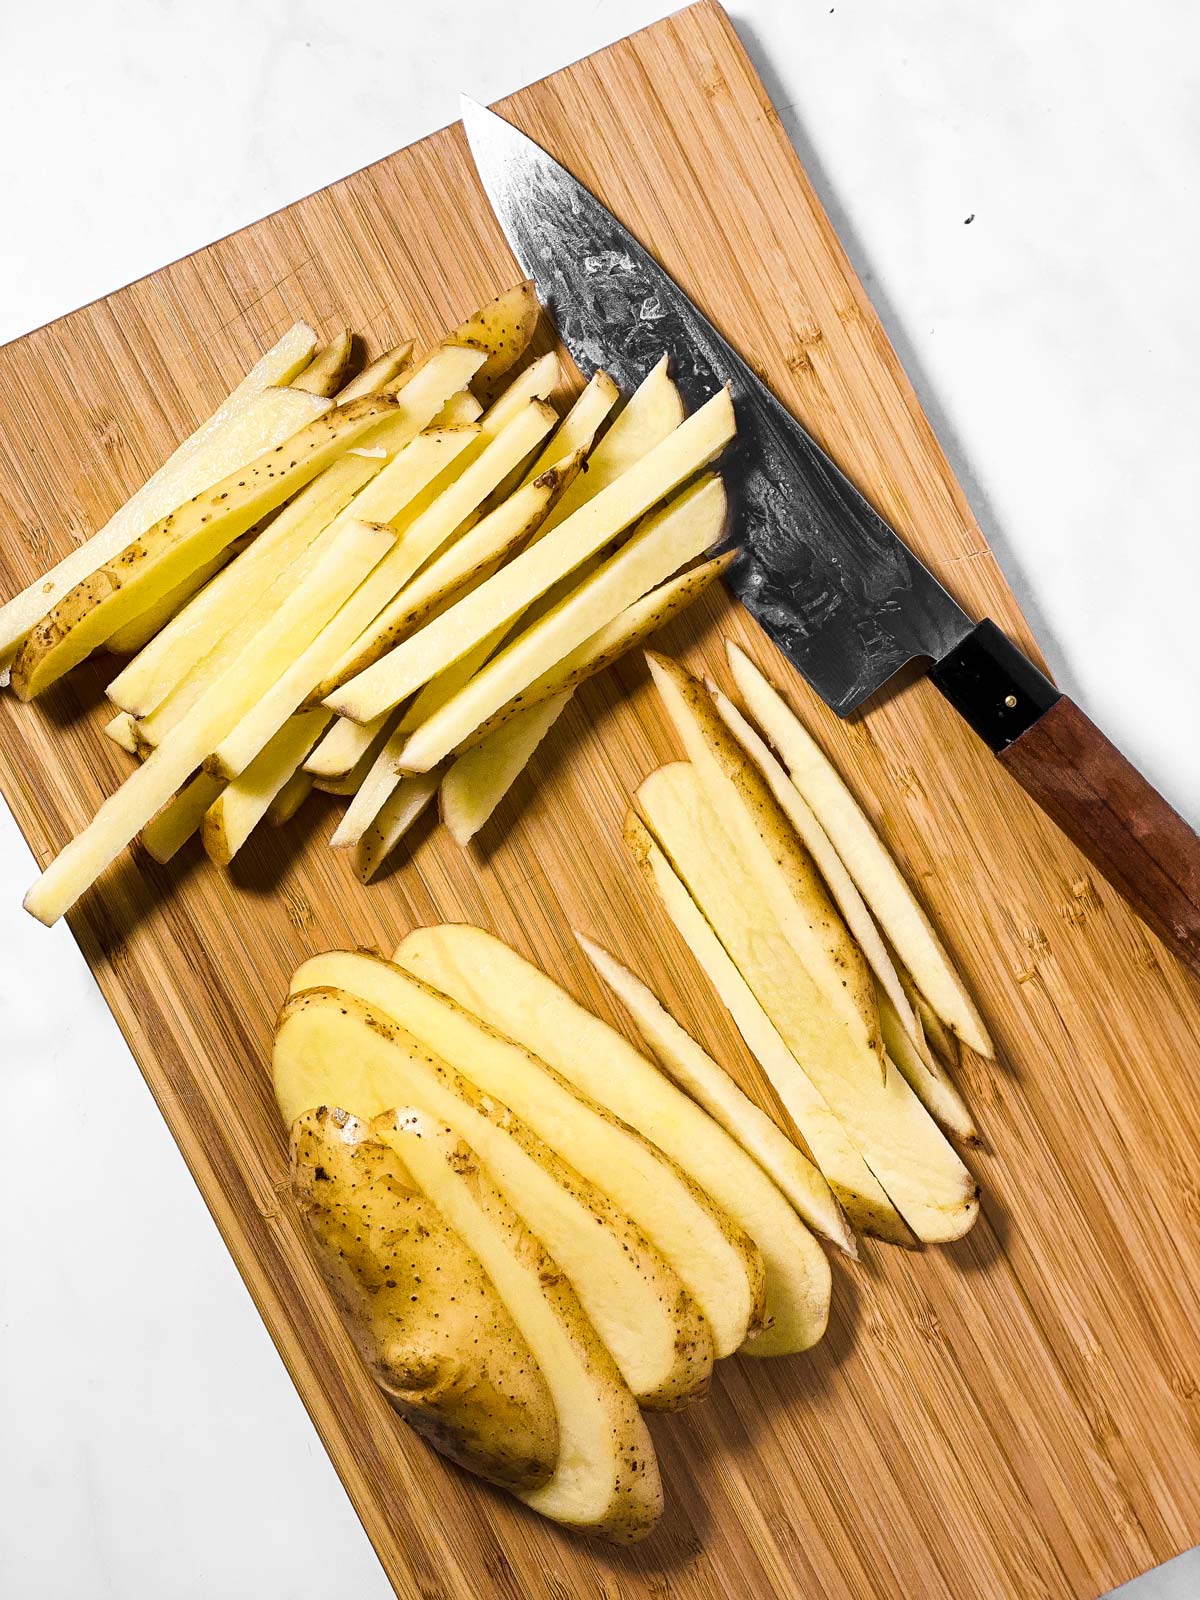 potatoes cut into fries on wooden board